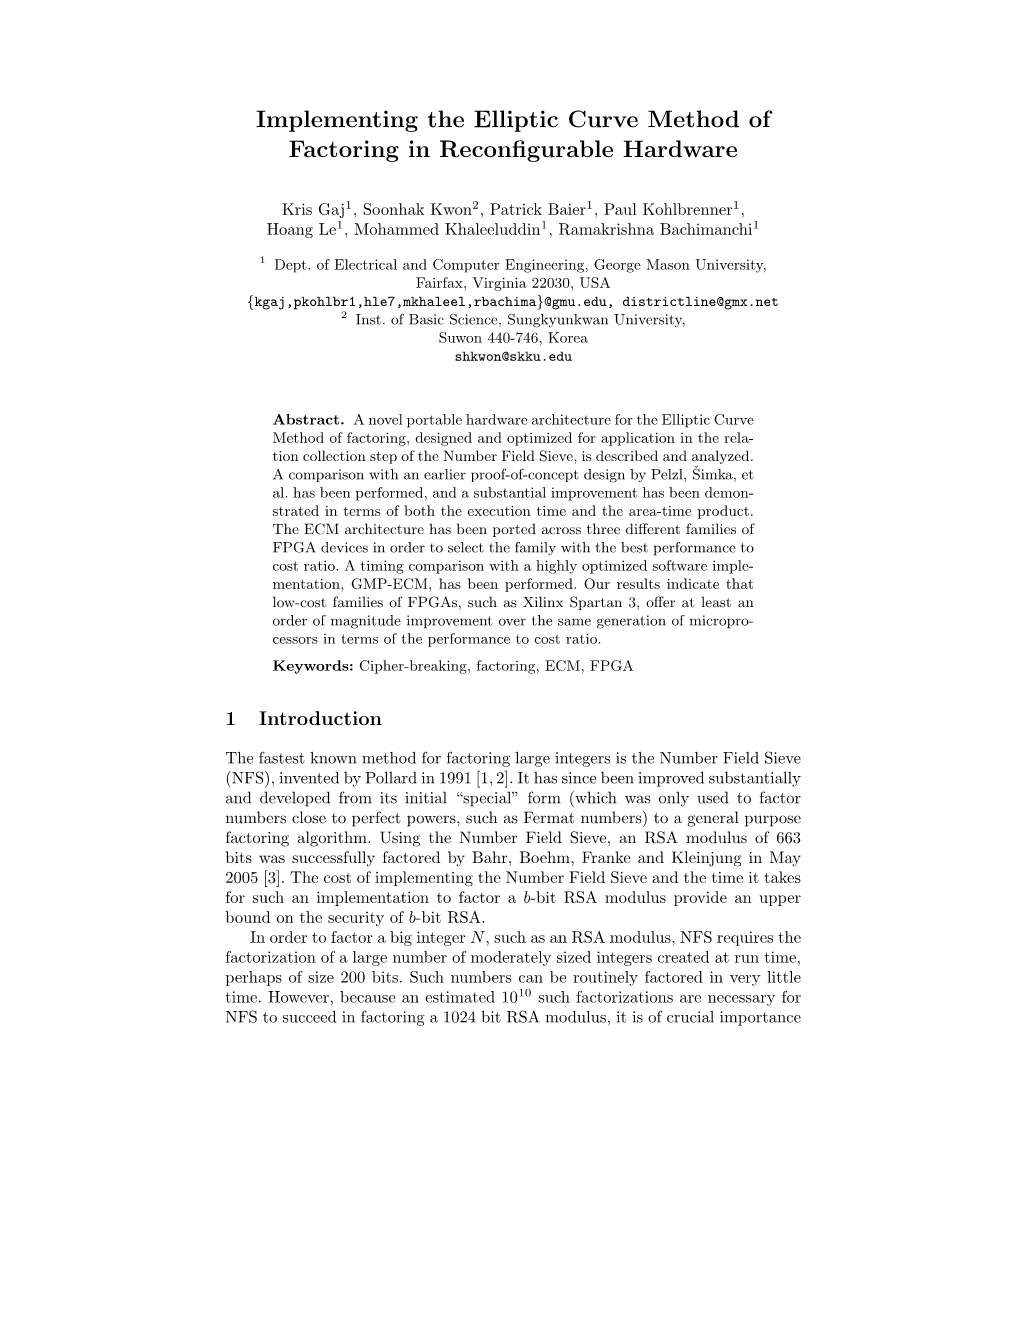 Implementing the Elliptic Curve Method of Factoring in Reconﬁgurable Hardware